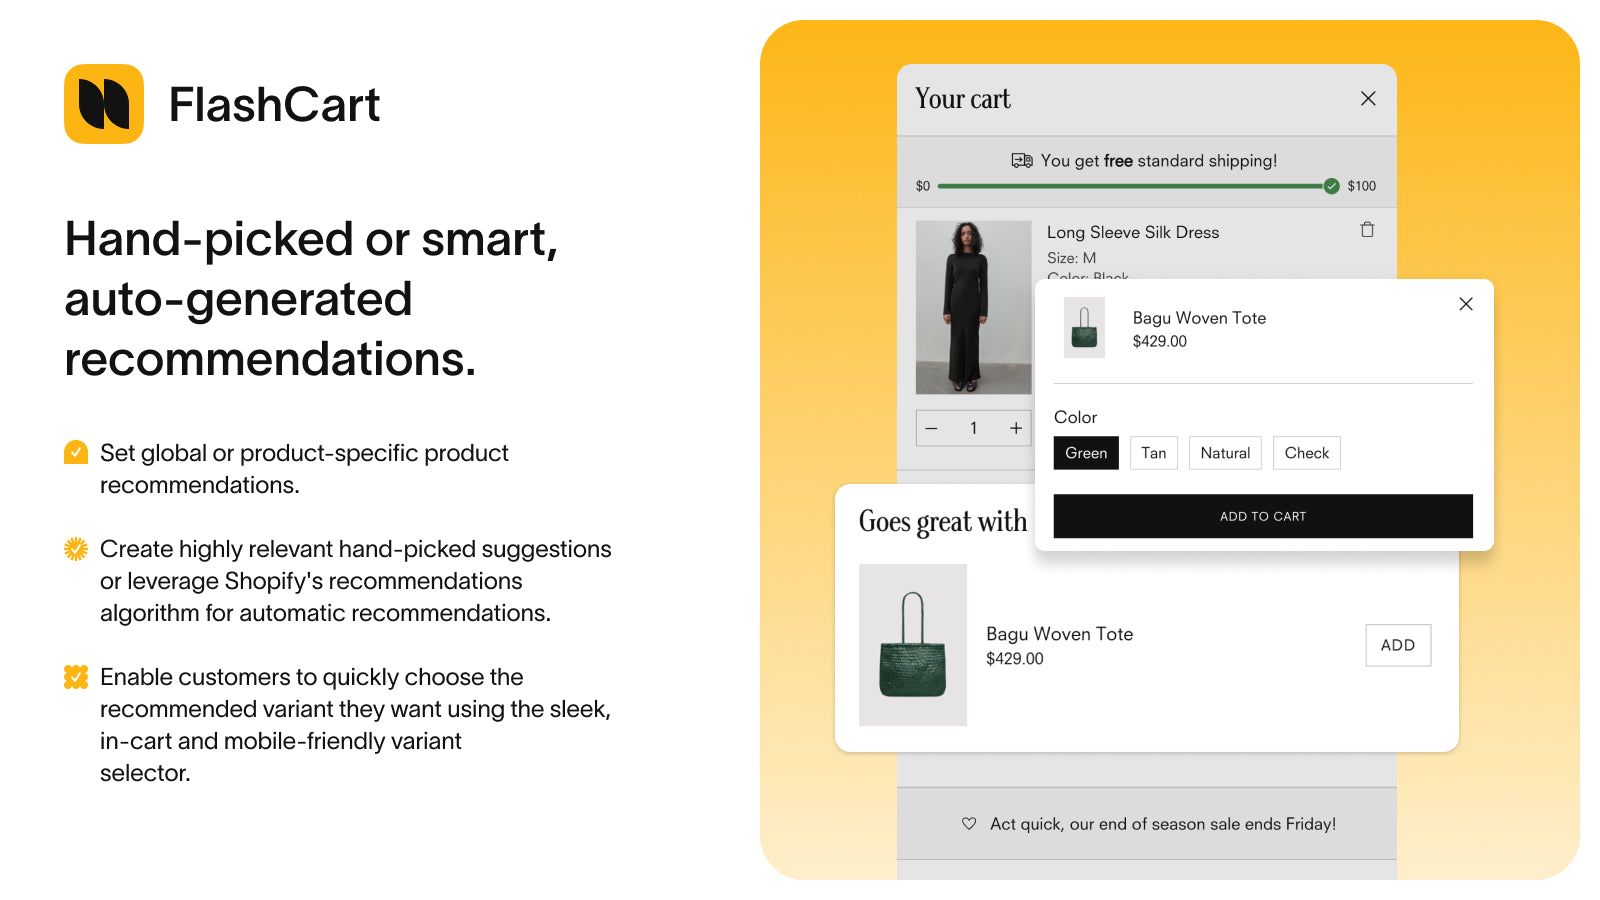 Boost conversions with relevant in-cart recommendations